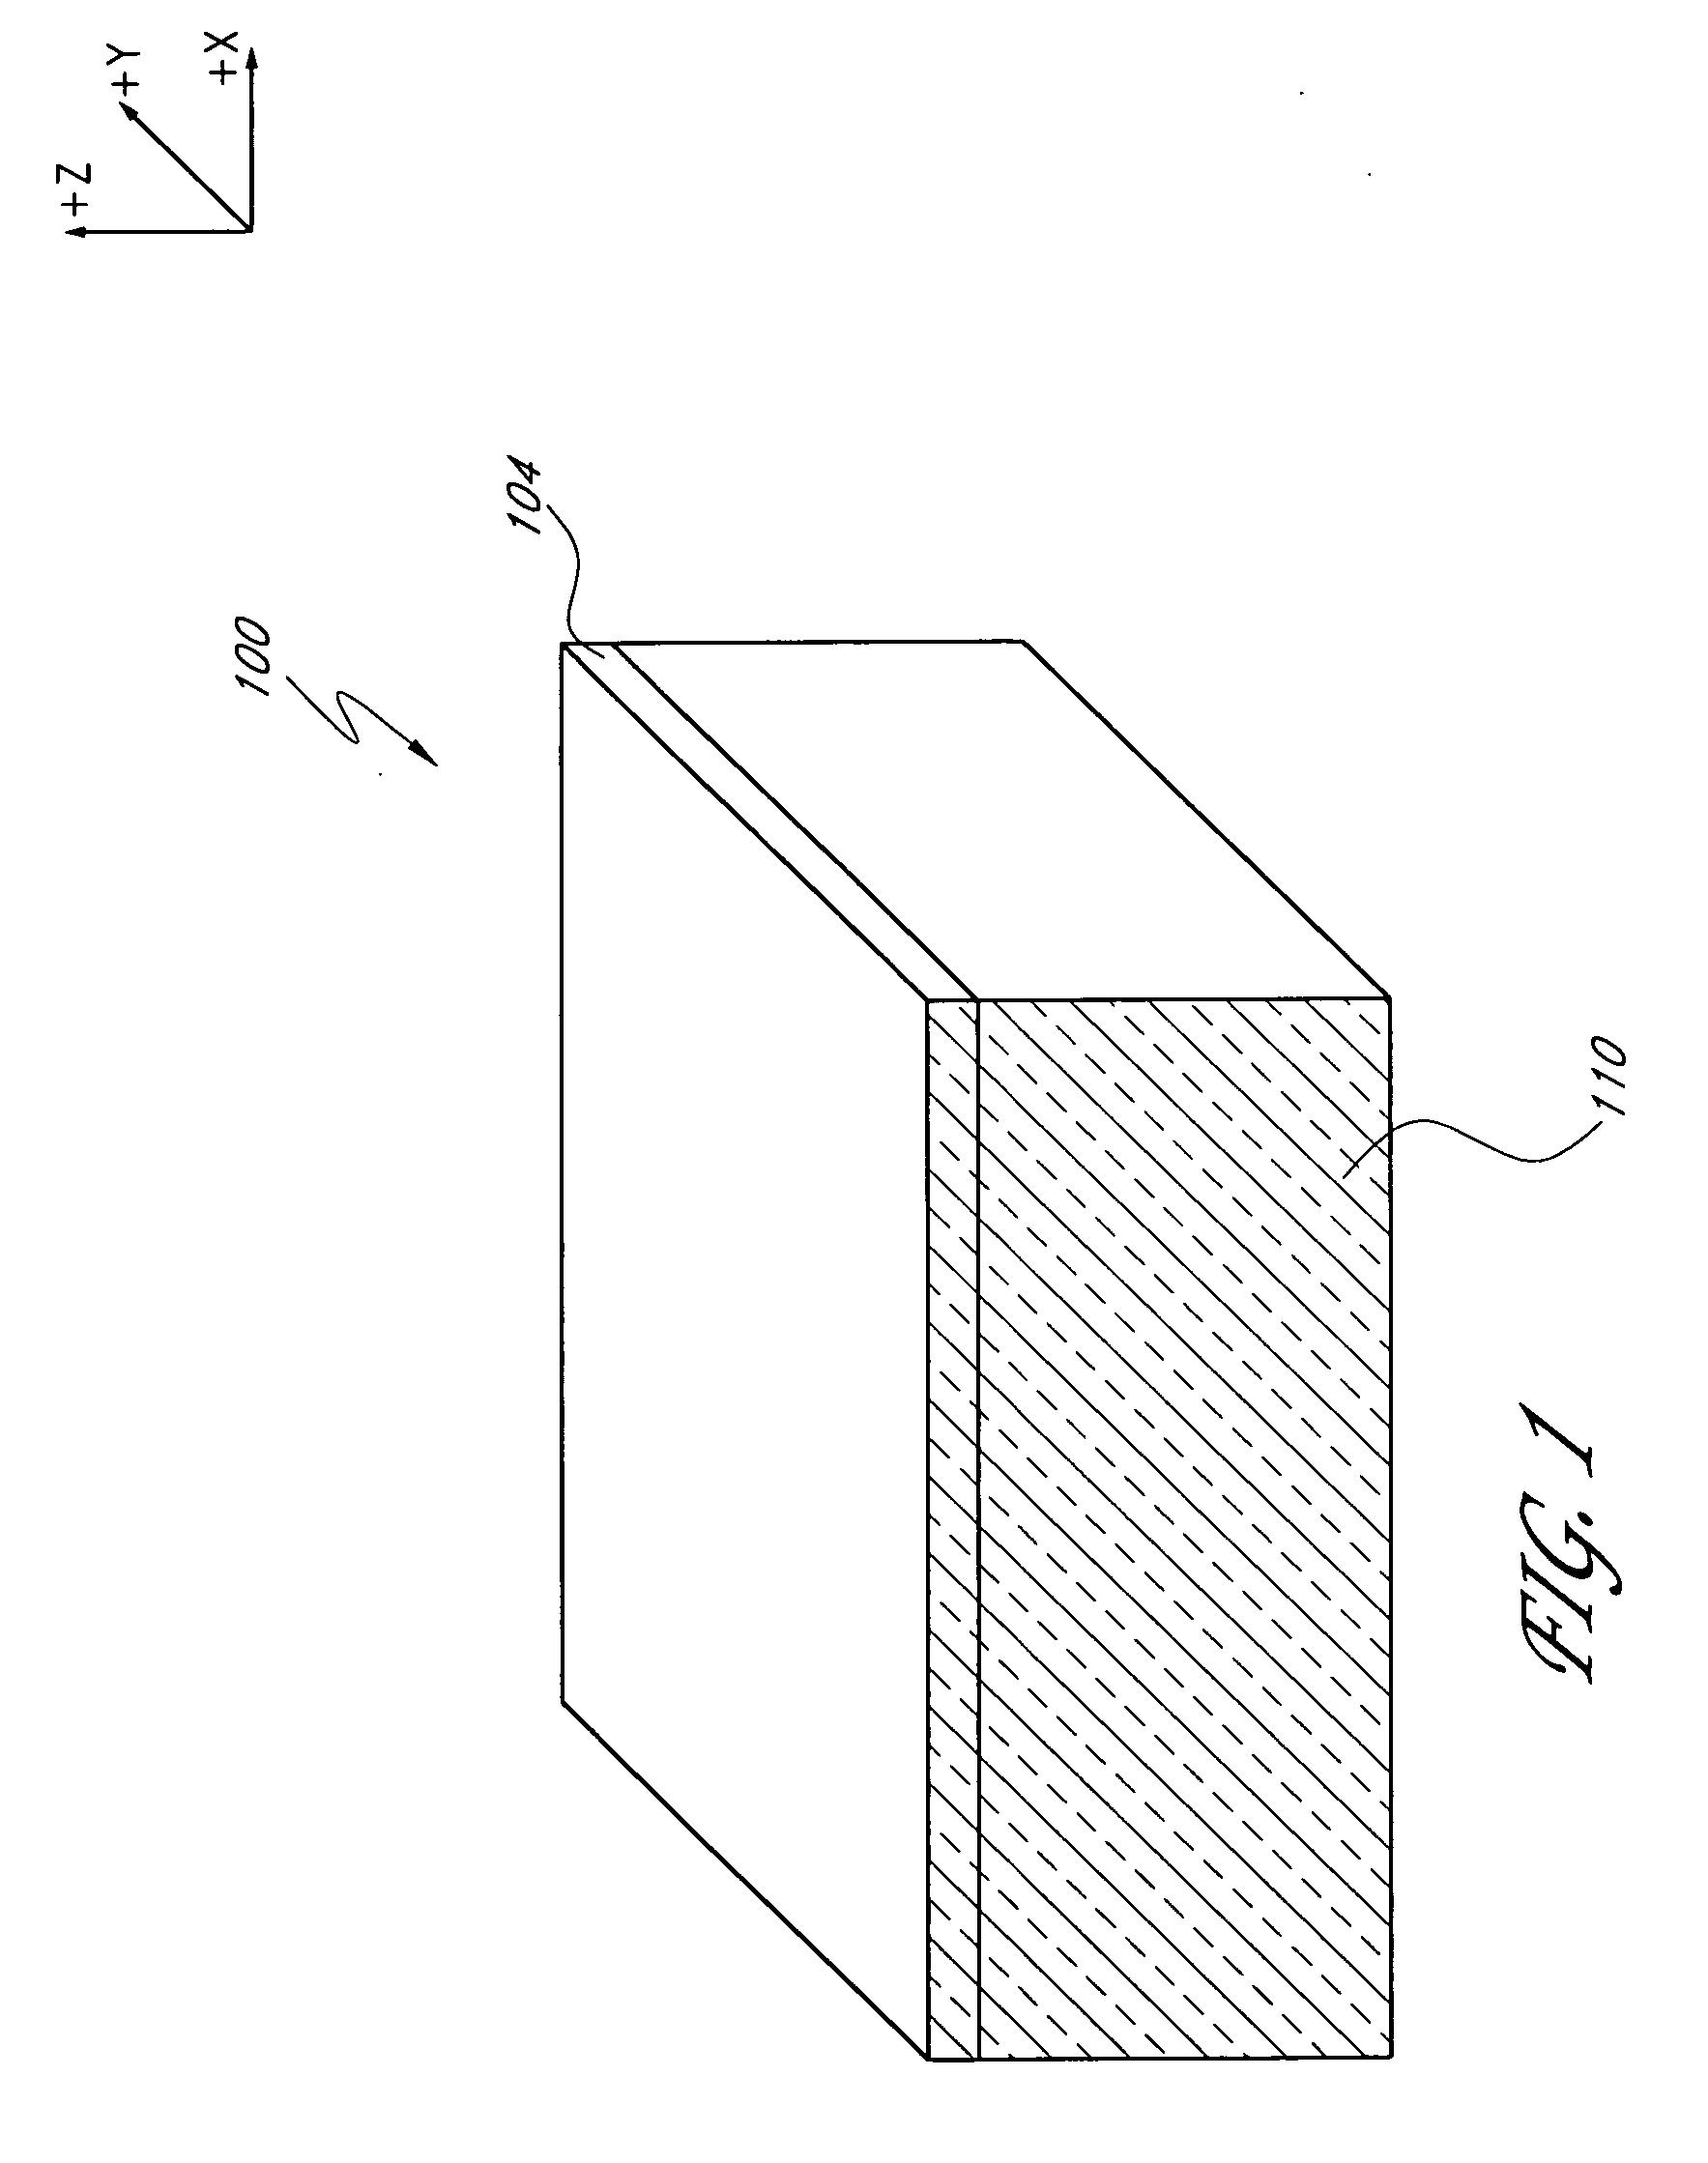 Vertical gated access transistor